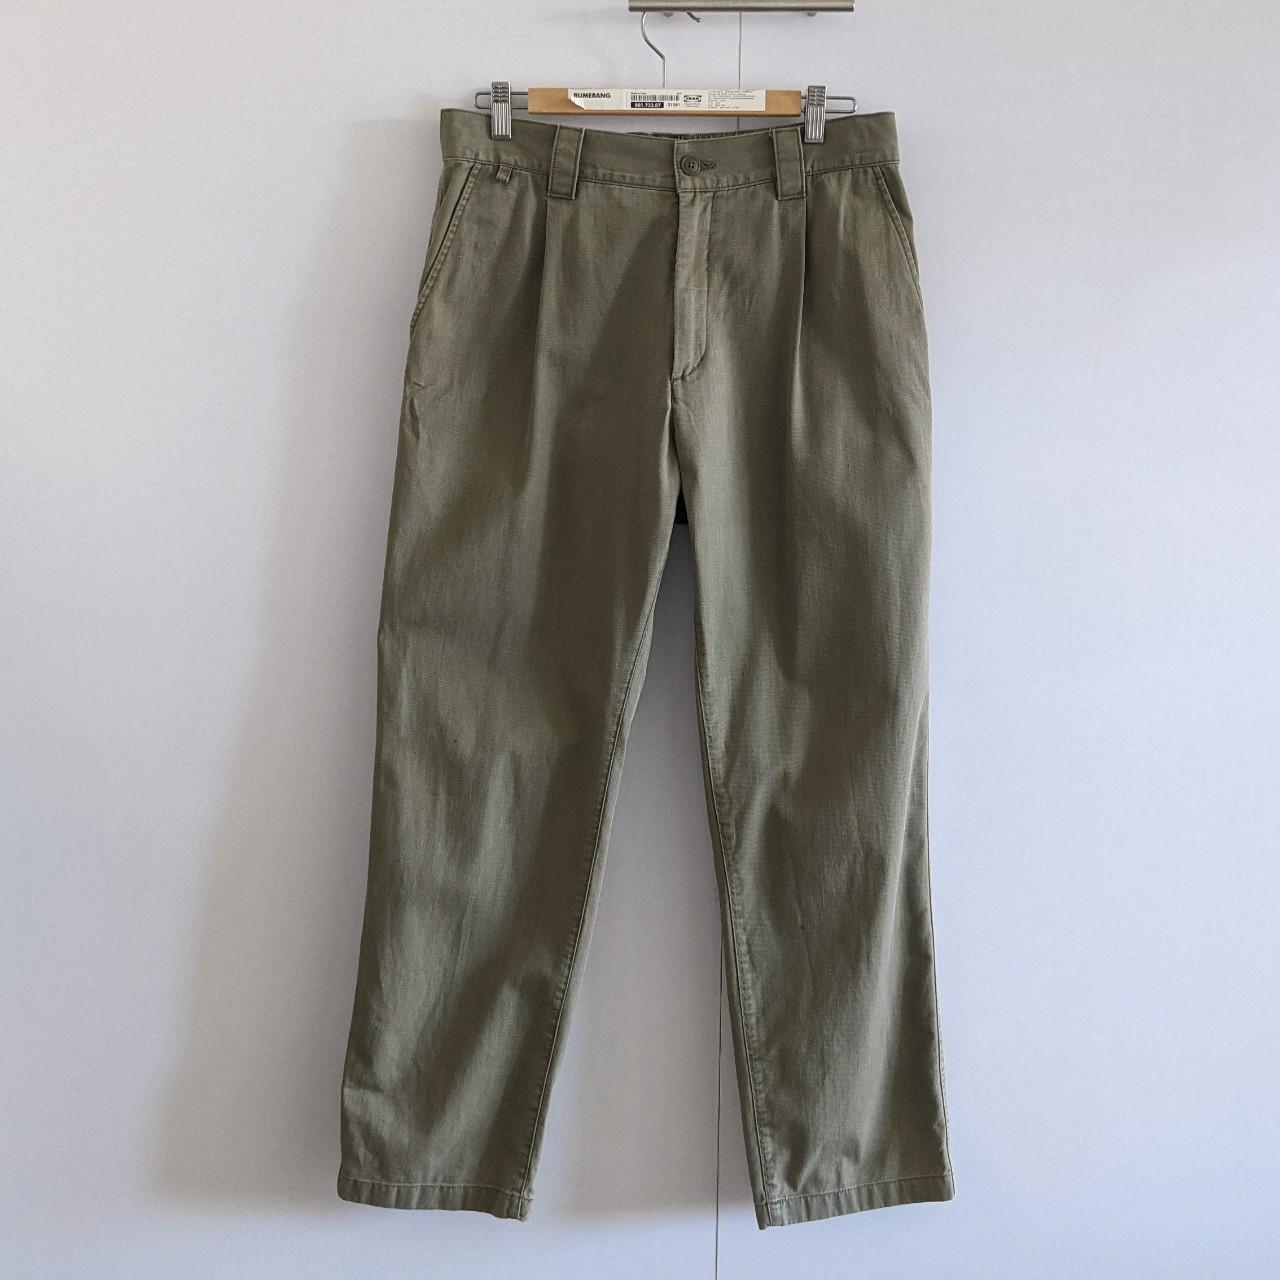 Uniqlo X JW Anderson pleated relaxed pants in olive... - Depop